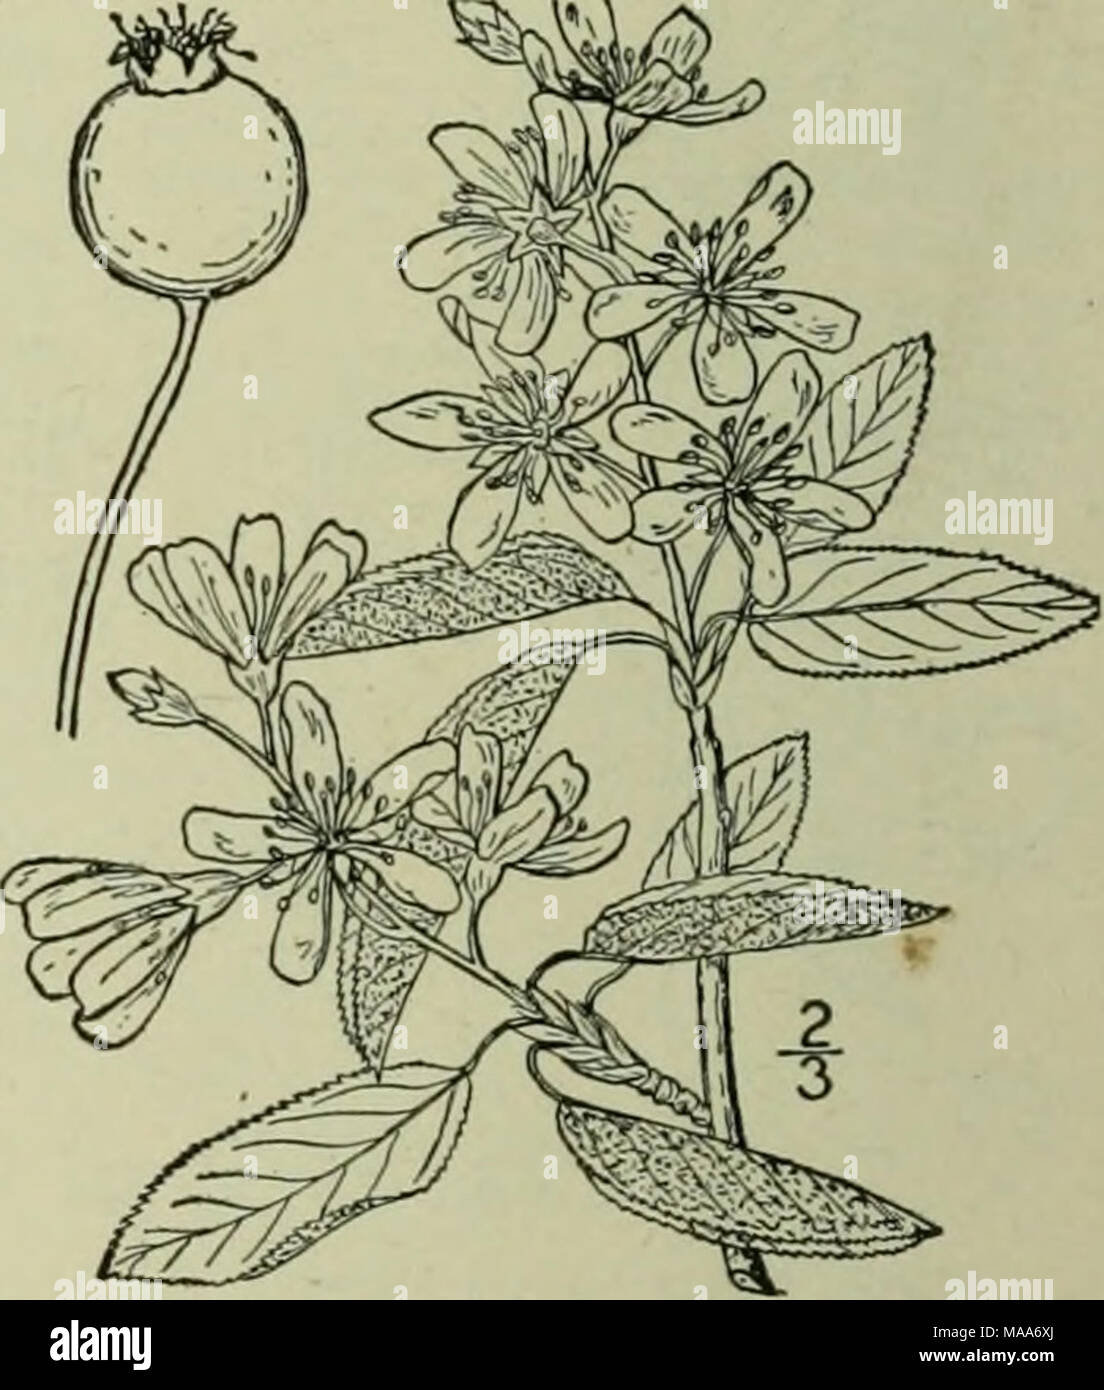 . An illustrated flora of the northern United States, Canada and the British possessions : from Newfoundland to the parallel of the southern boundary of Virginia and from the Atlantic Ocean westward to the 102nd meridian . A. nantucketensis Bicknell differs in having shorter petals and thicker leaves, and ranges from Massachusetts to New Jersey. 3. Amelanchier spicata (Lam.) C. Koch. Low June-berry. Fig. 2331. Crataegus spicata Lam. Encycl. i: 84. 1783. Amelanchier spicata C. Koch, Dendr. i: 182. 1869. A. stolonifera Wiegand, Rhodora 14: 144. 1912. ?A. humilis Wiegand, loc. cit. 141. 1912. Ste Stock Photo